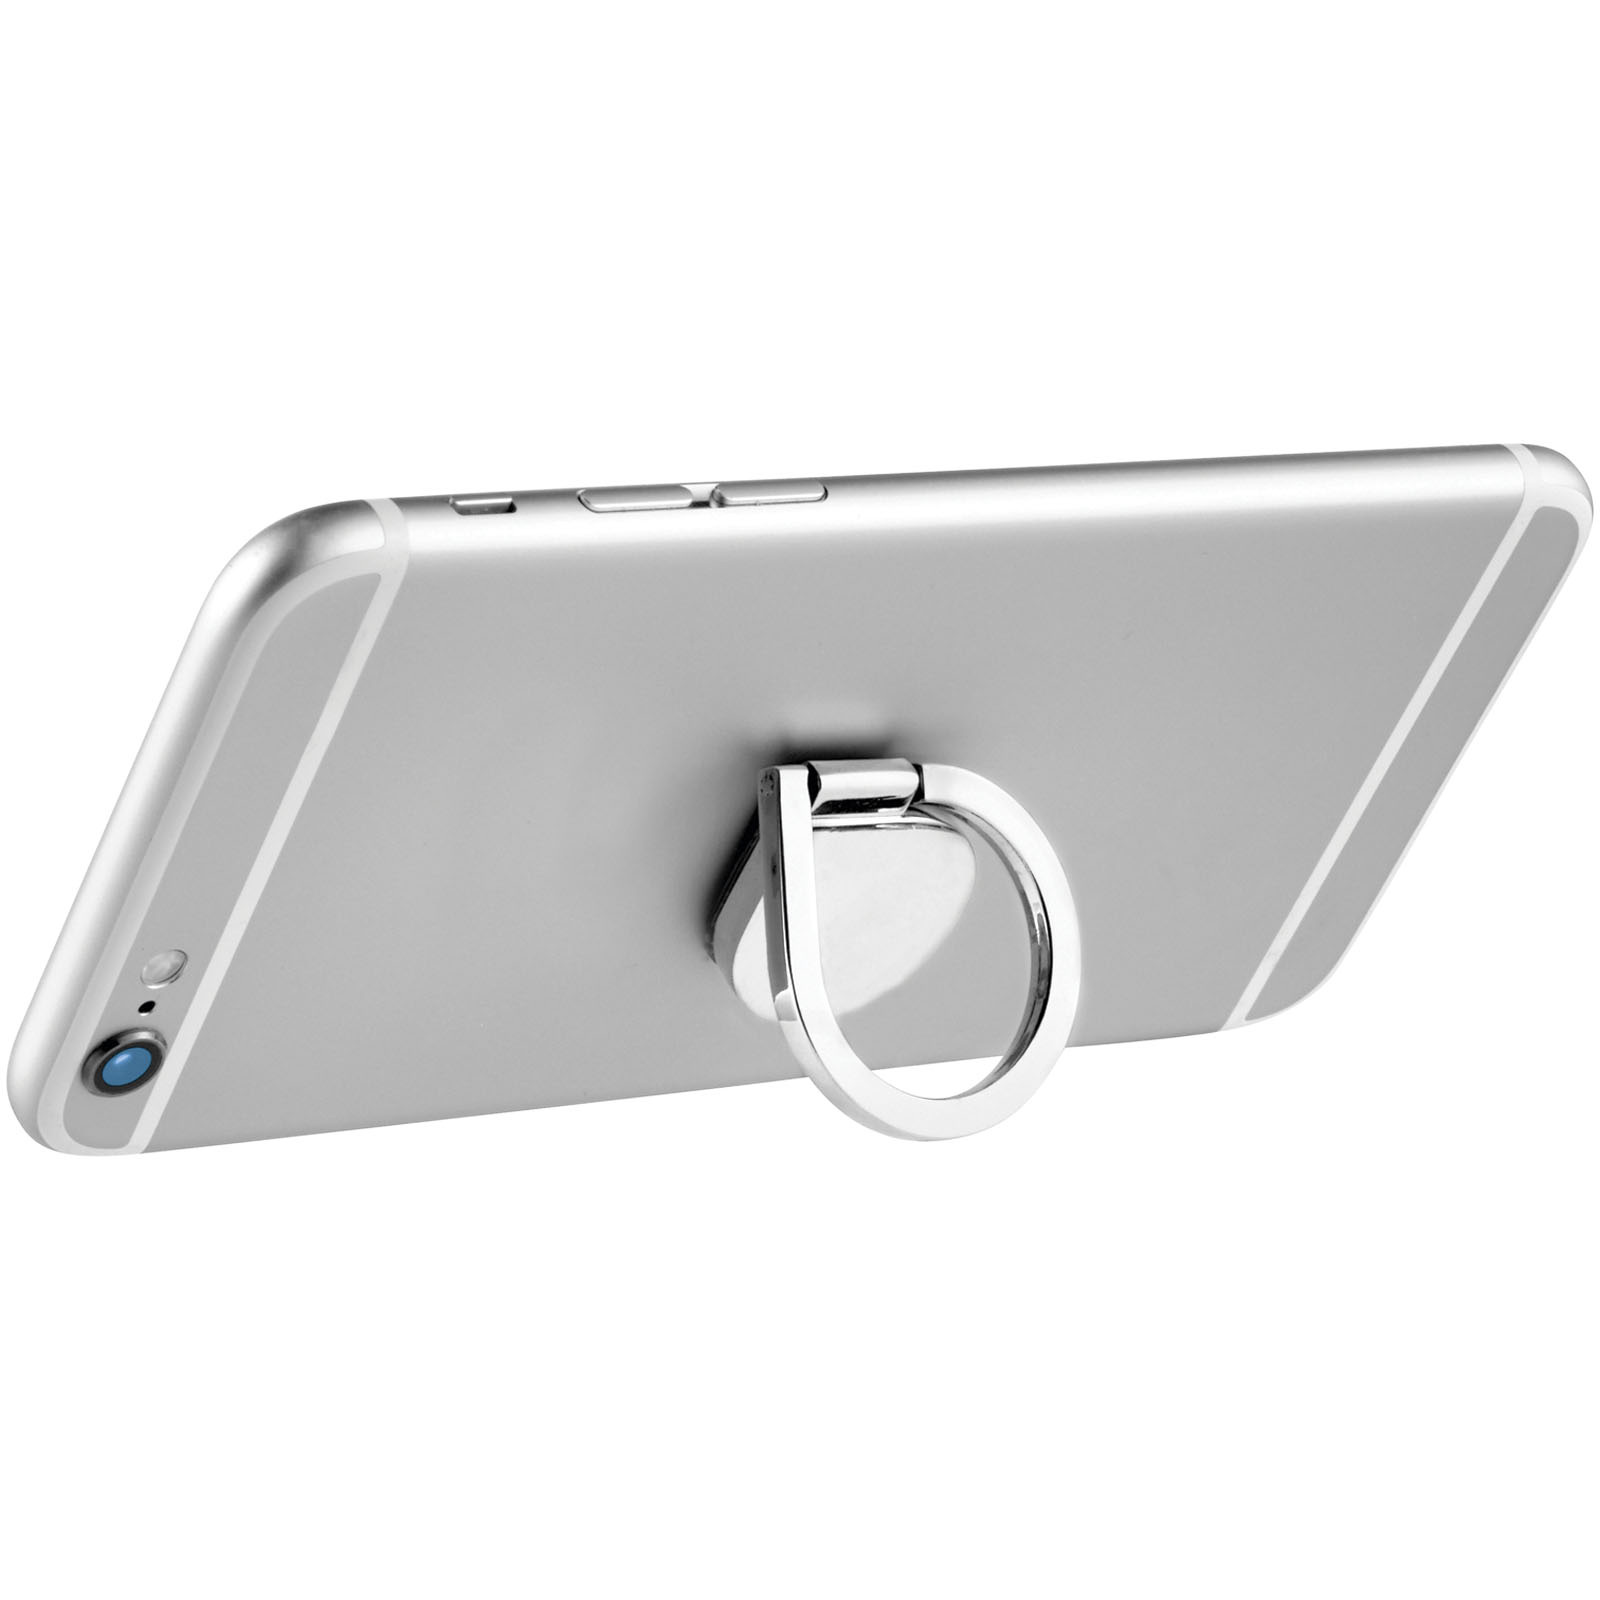 Advertising Telephone & Tablet Accessories - Cell aluminium ring phone holder